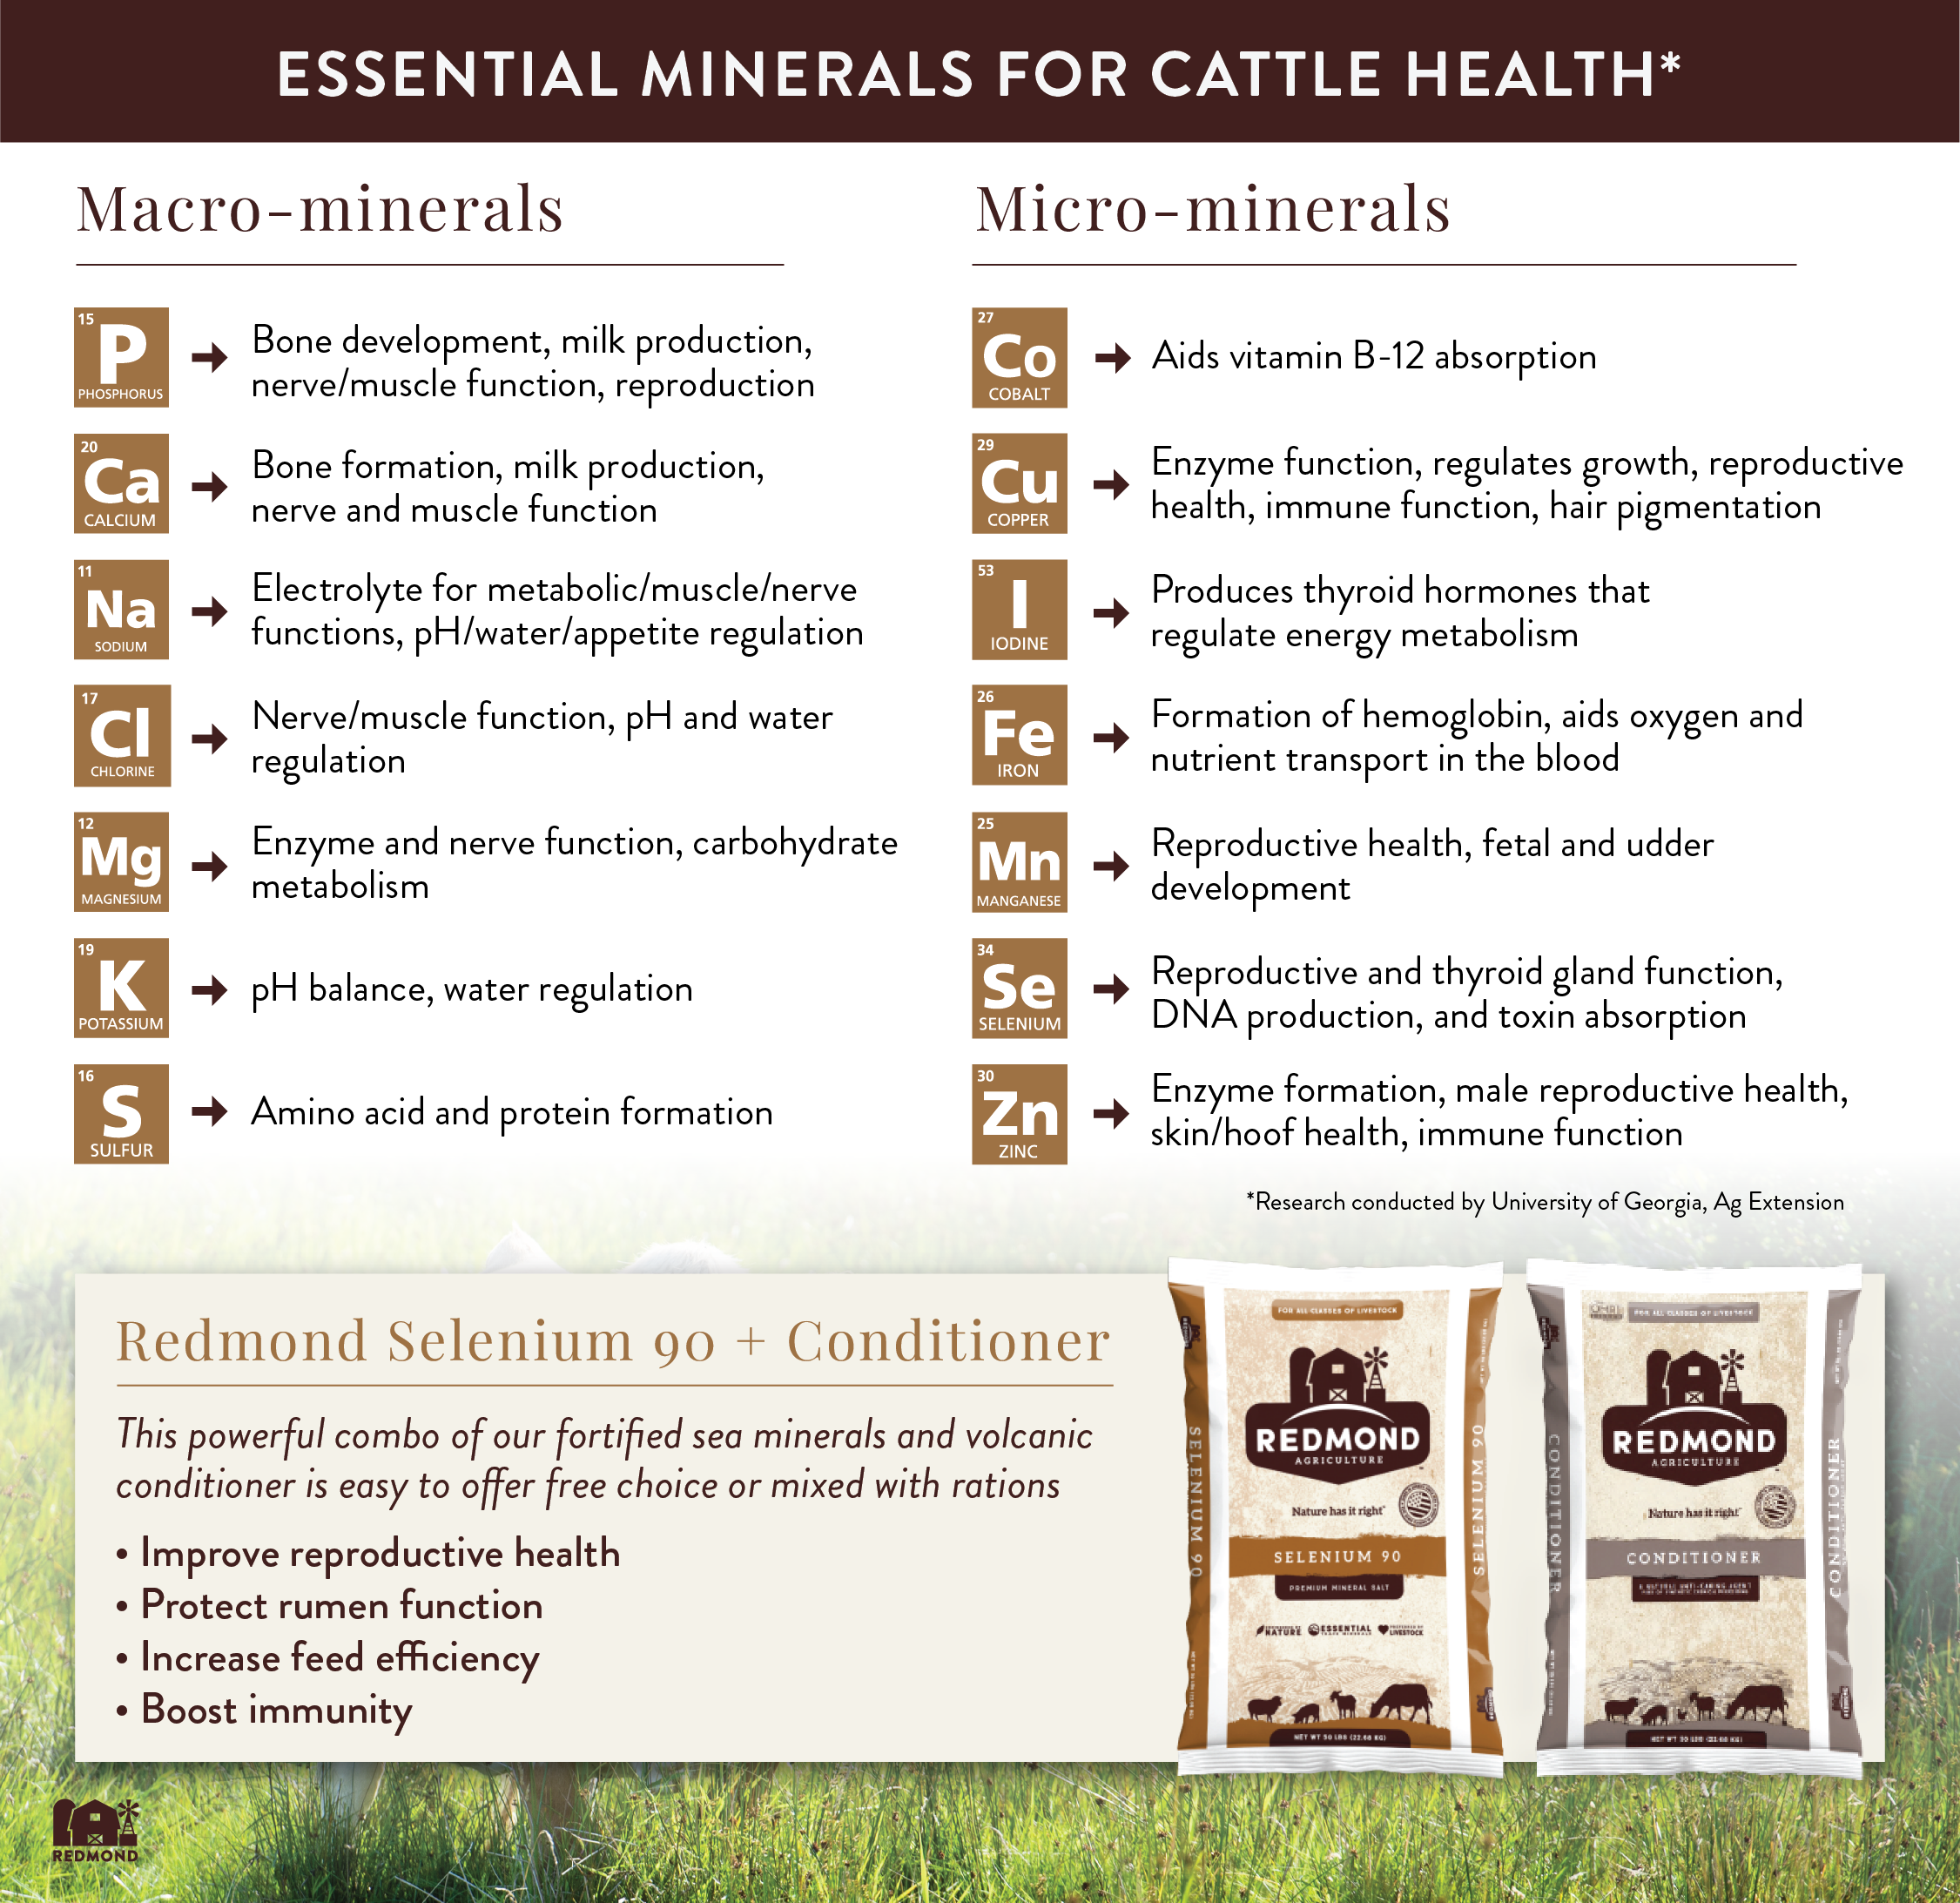 Essential minerals for cattle health